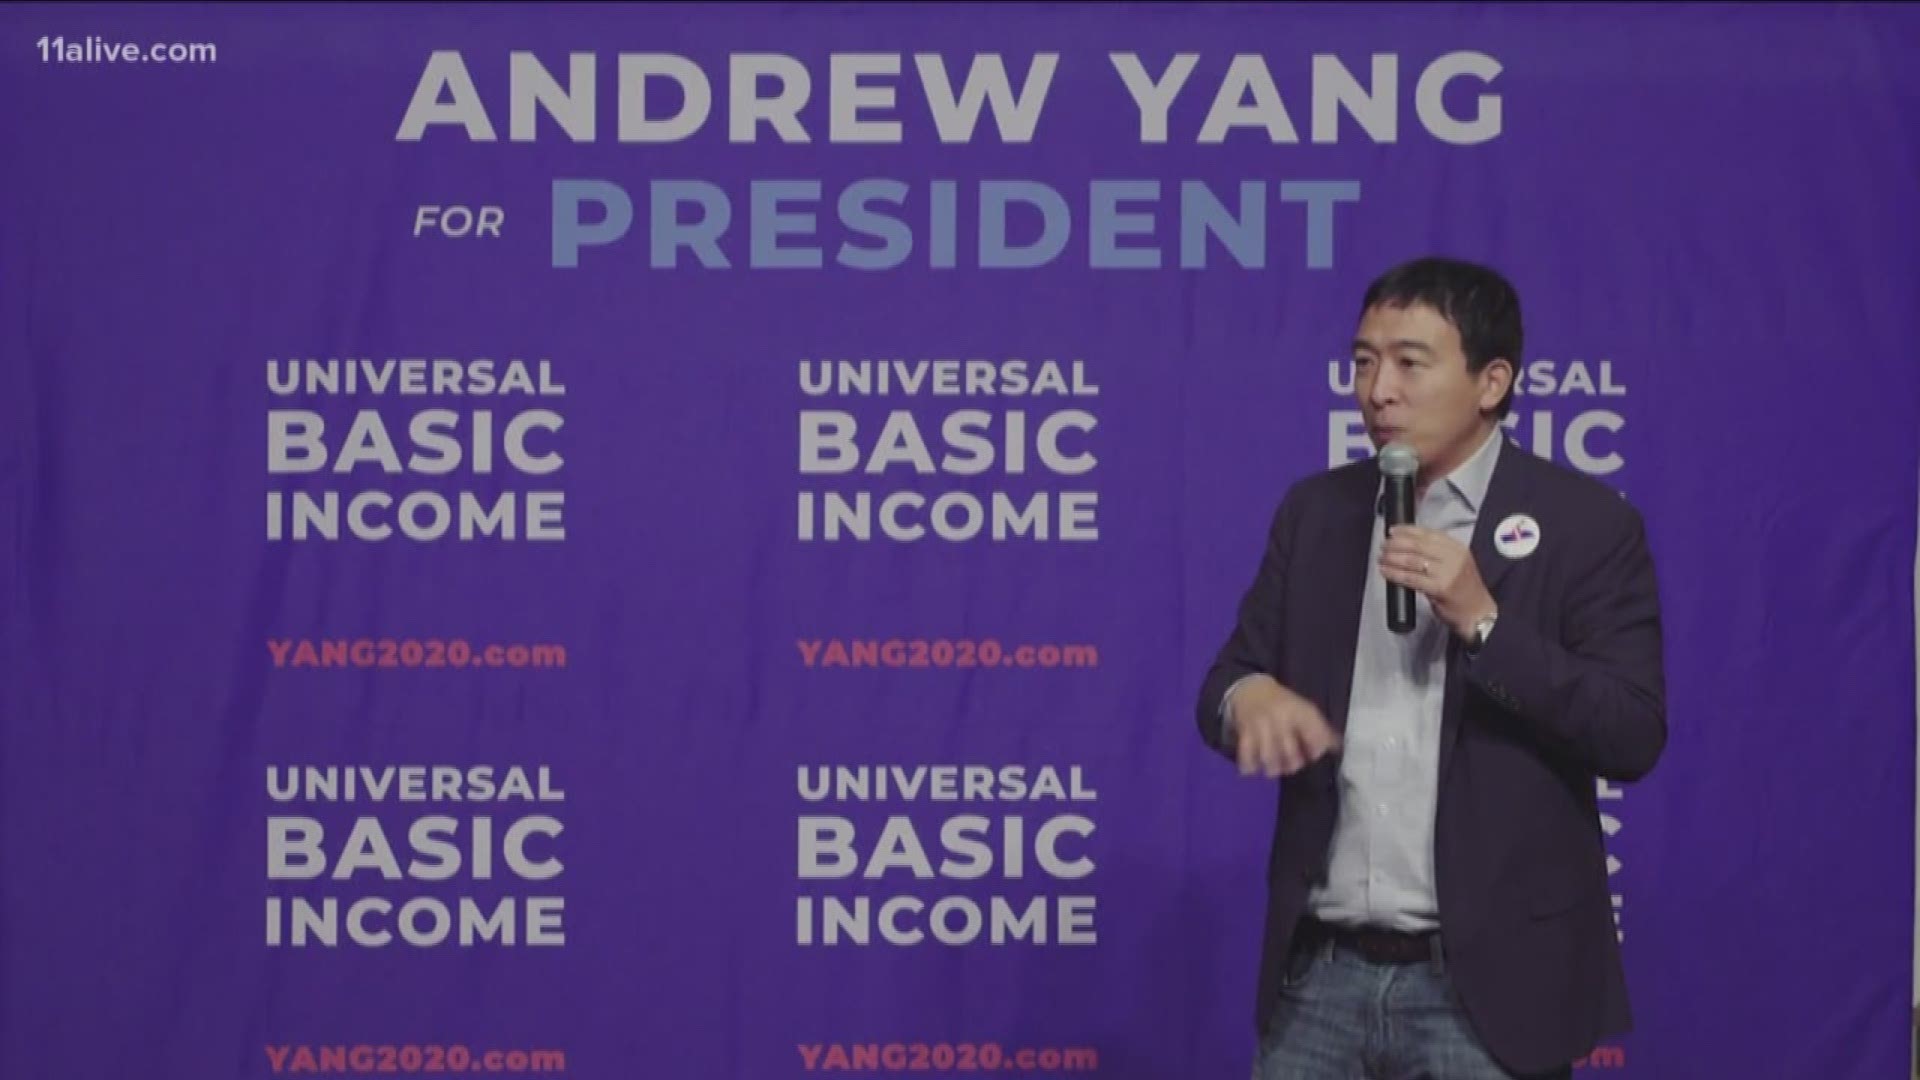 Why he believes a universal basic income would be beneficial to the country.